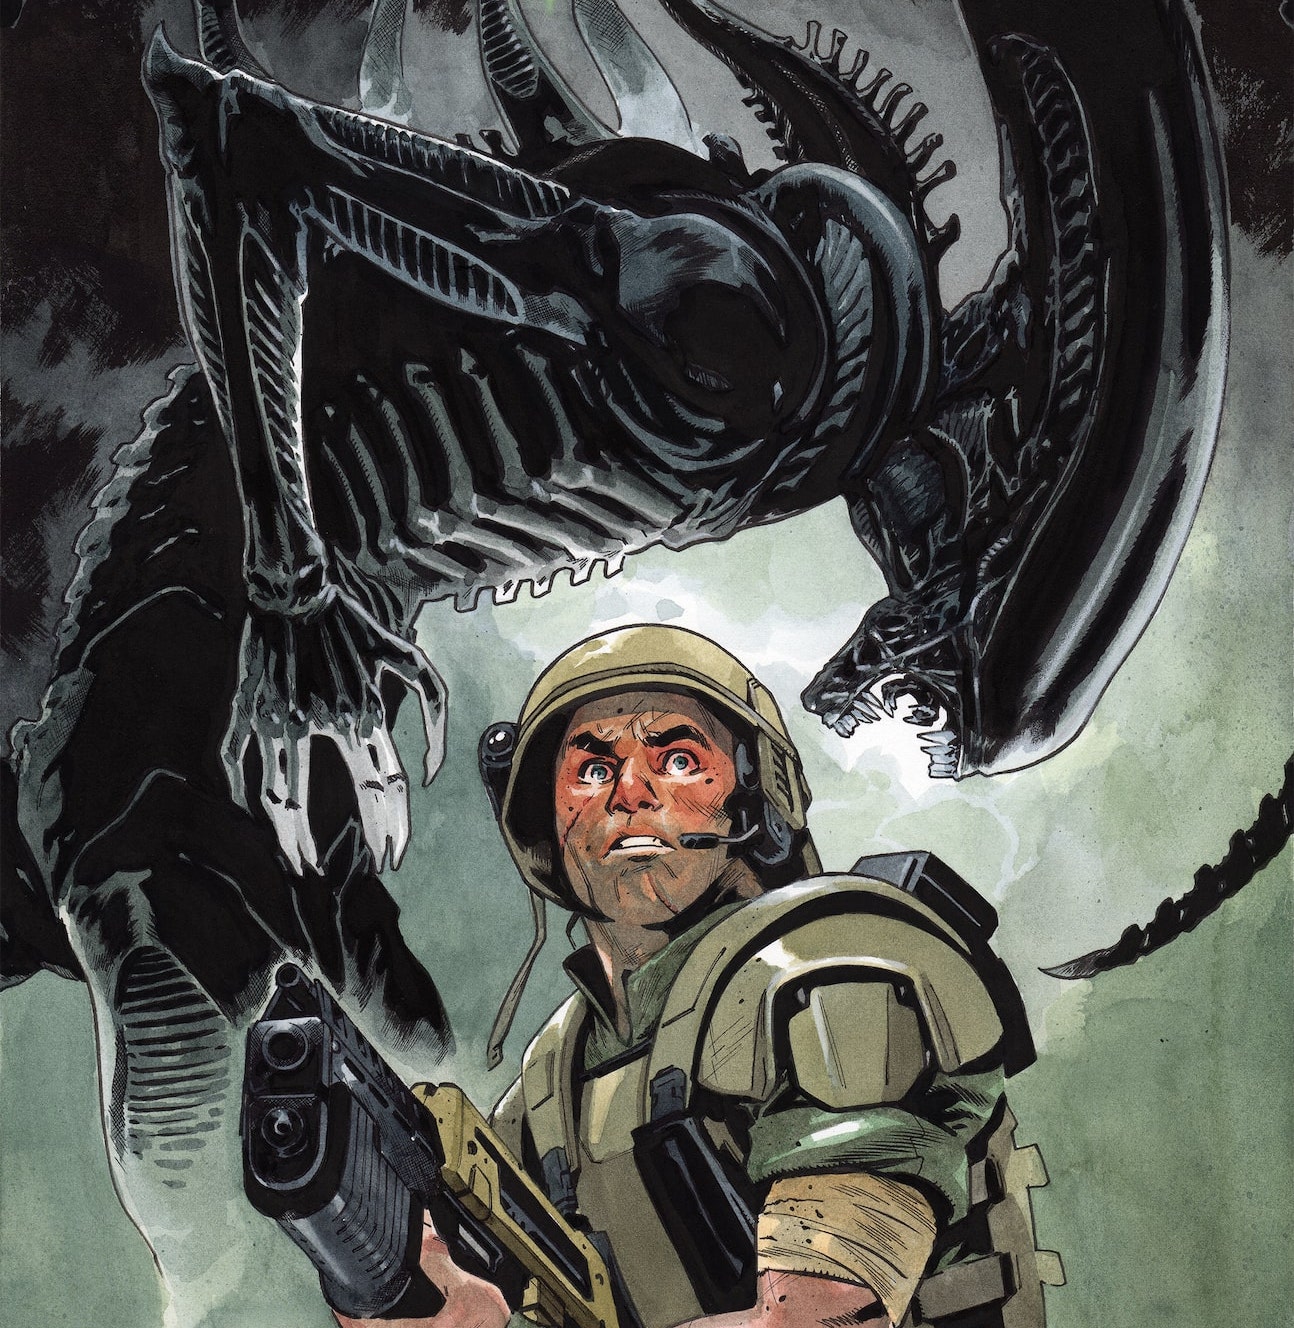 Marvel launching 'Aliens: The Original Years Omnibus' Vol. 2 to Earth in August 2021